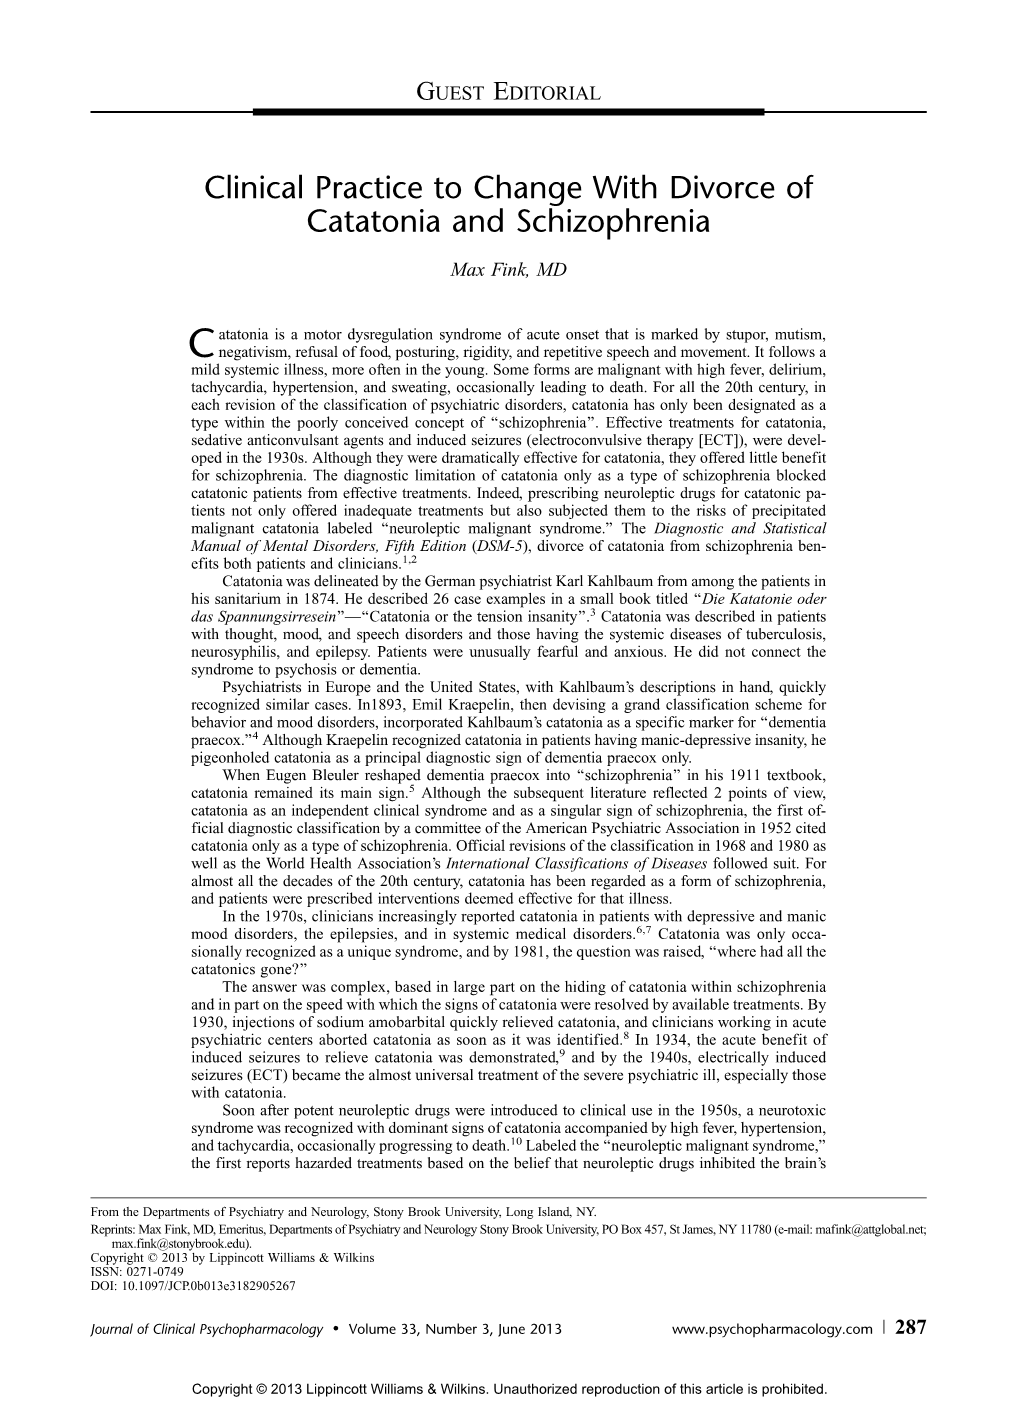 Clinical Practice to Change with Divorce of Catatonia and Schizophrenia